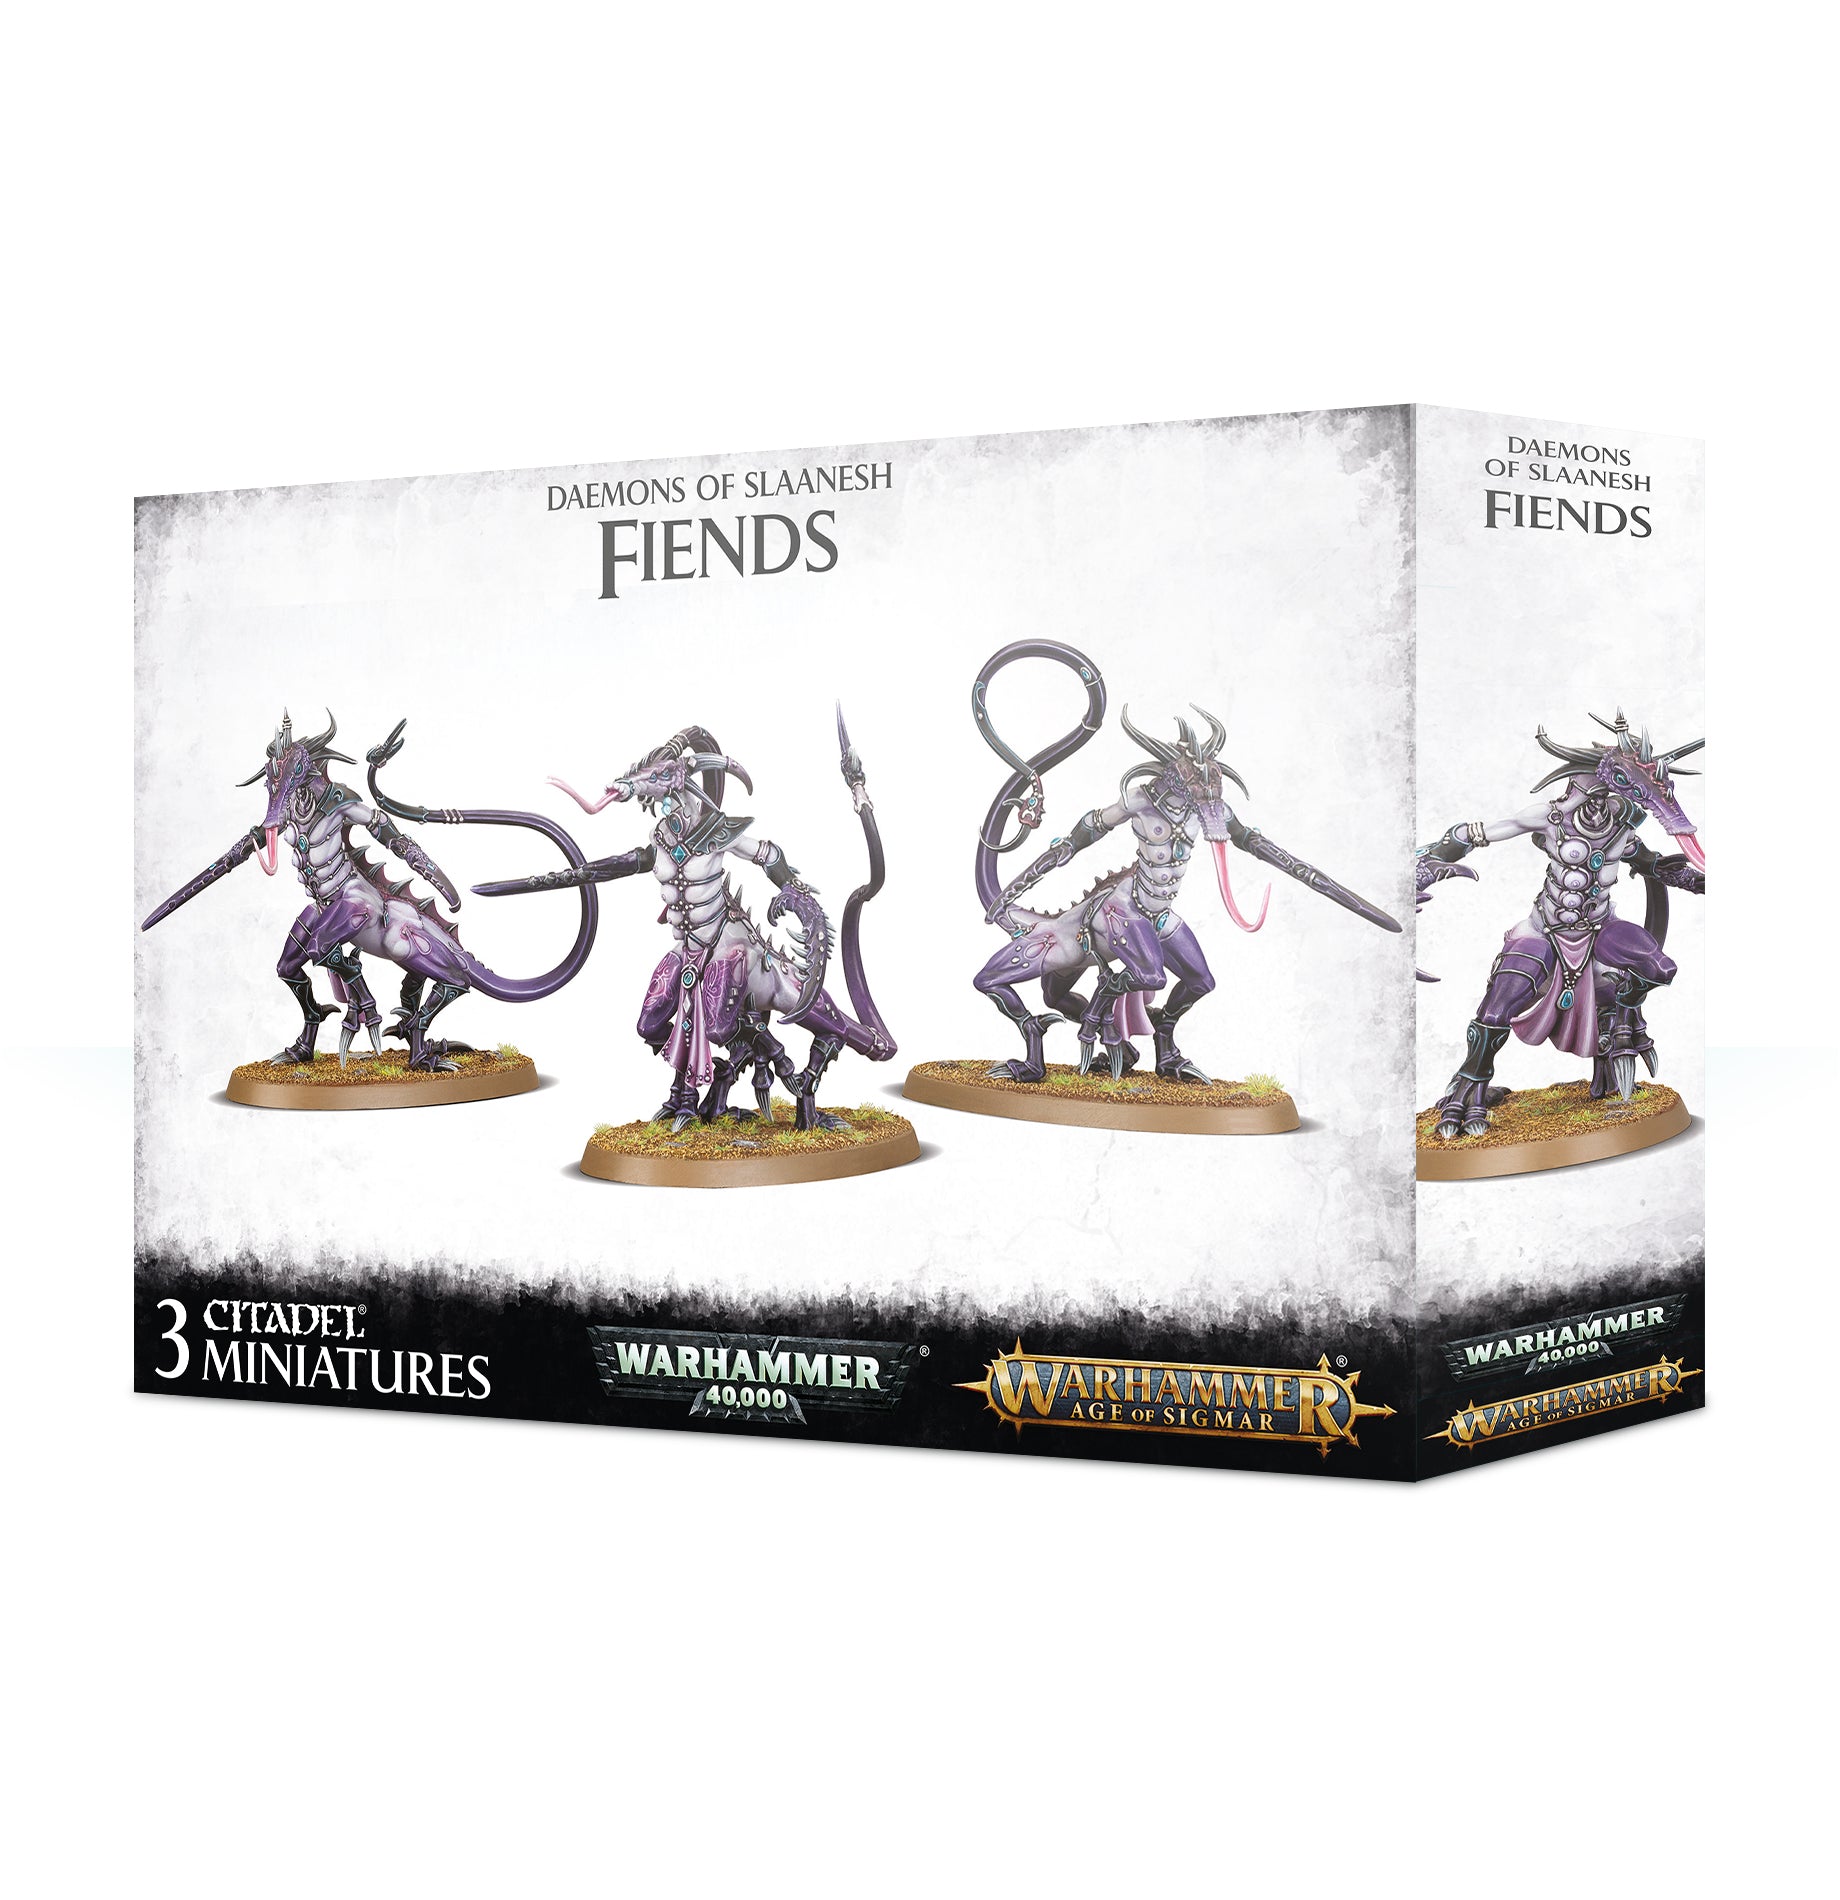 Warhammer Age of Sigmar: Daemons of Slaanesh: Fiends | All About Games